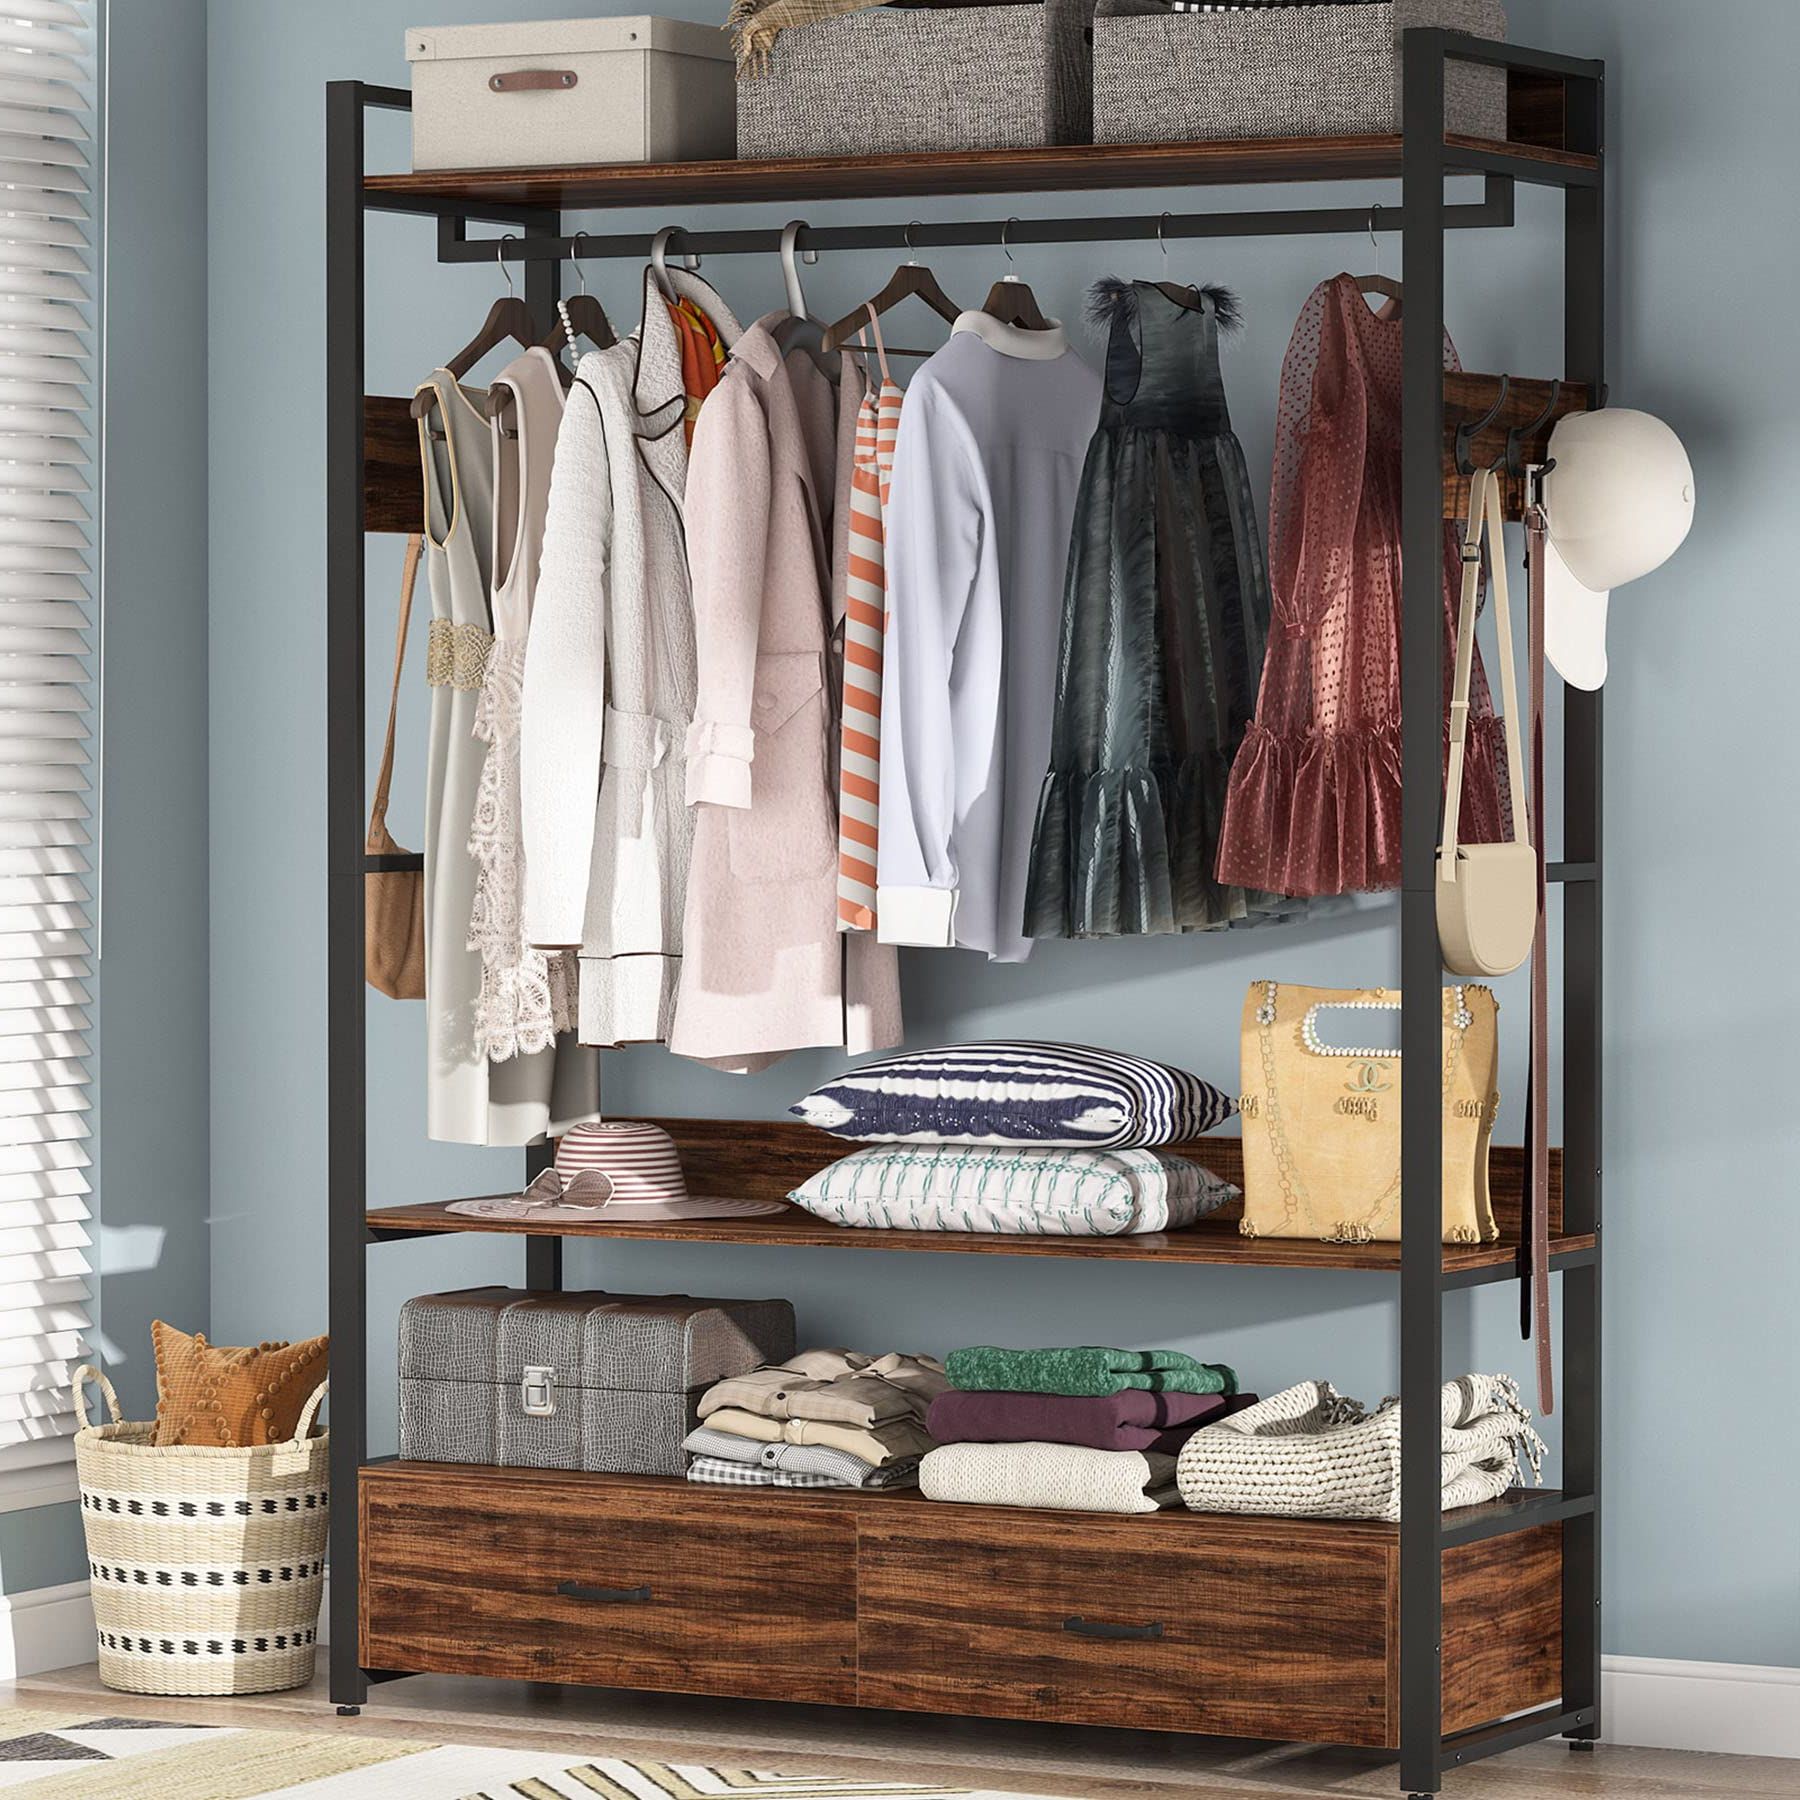 Amazon: Tribesigns Freestanding Clothes Rack Shelves, Closet Organizer  With Shelves Drawers And Hooks, Heavy Duty Garment Clothing Wardrobe Storage  Shelving With Hanging Rod, Rustic : Home & Kitchen In Popular Standing Closet Clothes Storage Wardrobes (View 9 of 10)